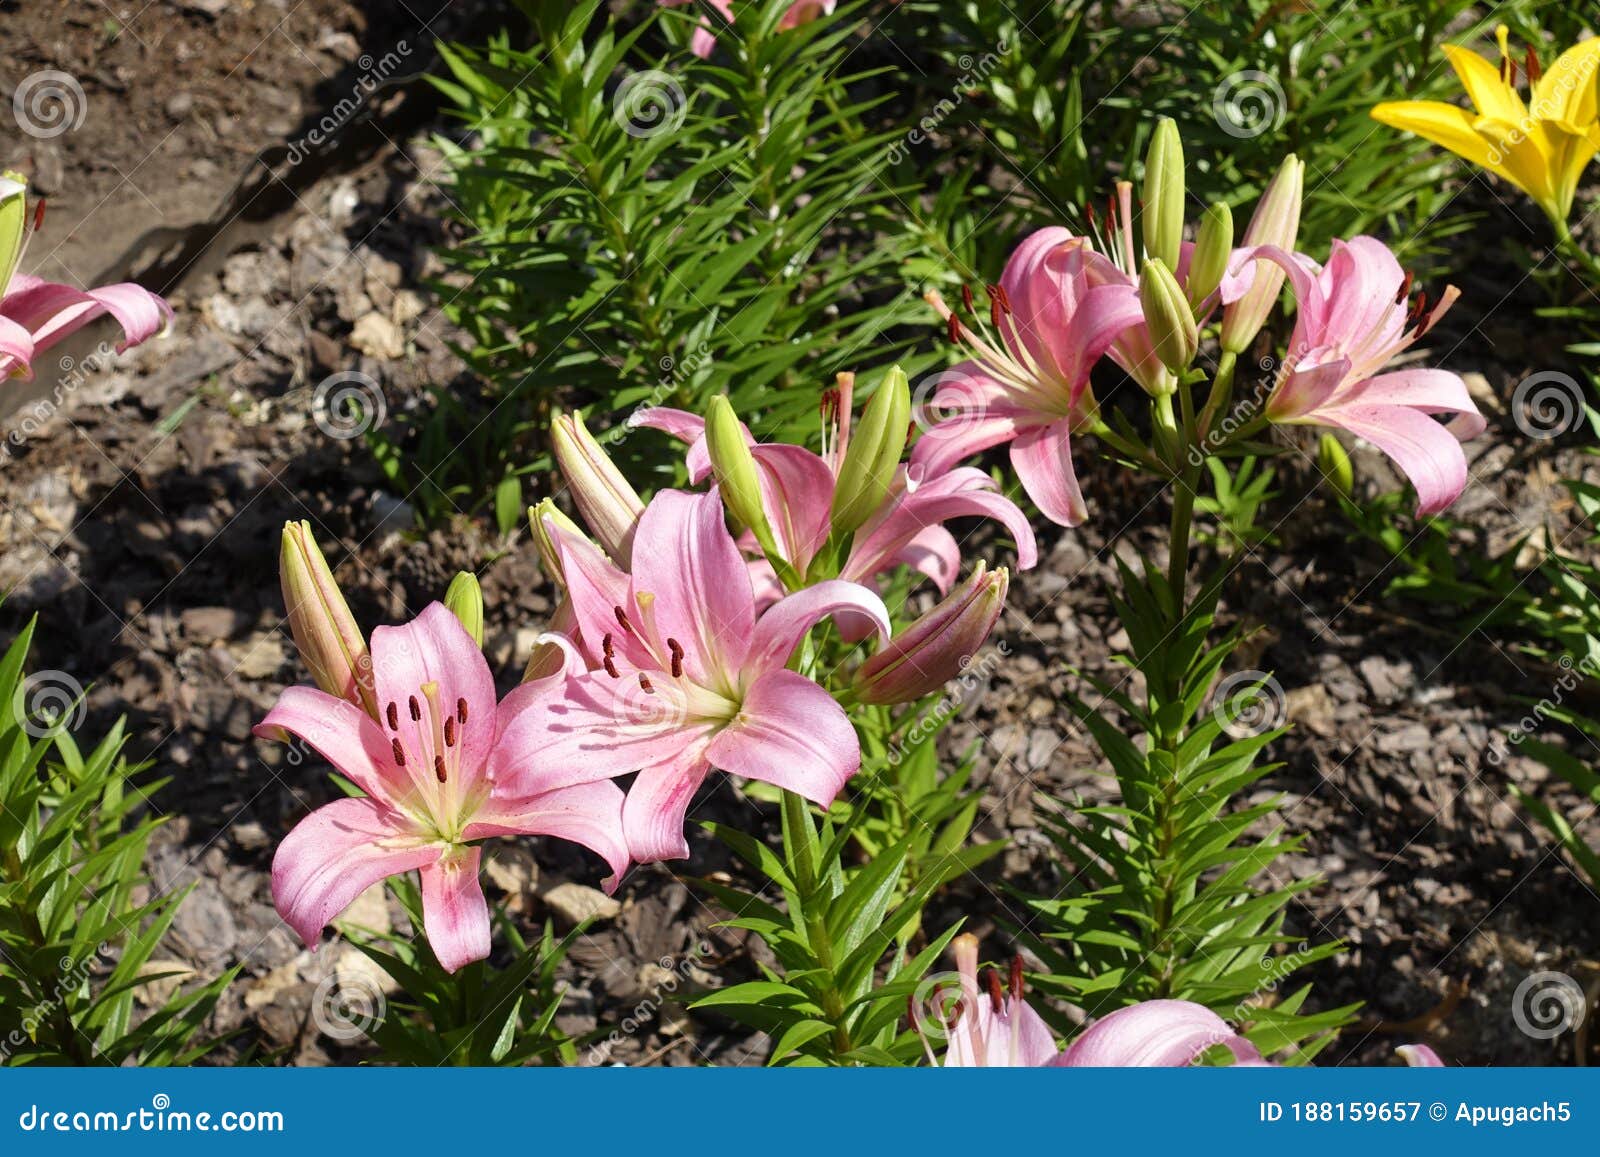 Blooming Light Pink Lilies in June Stock Image - Image of bloom, growth ...